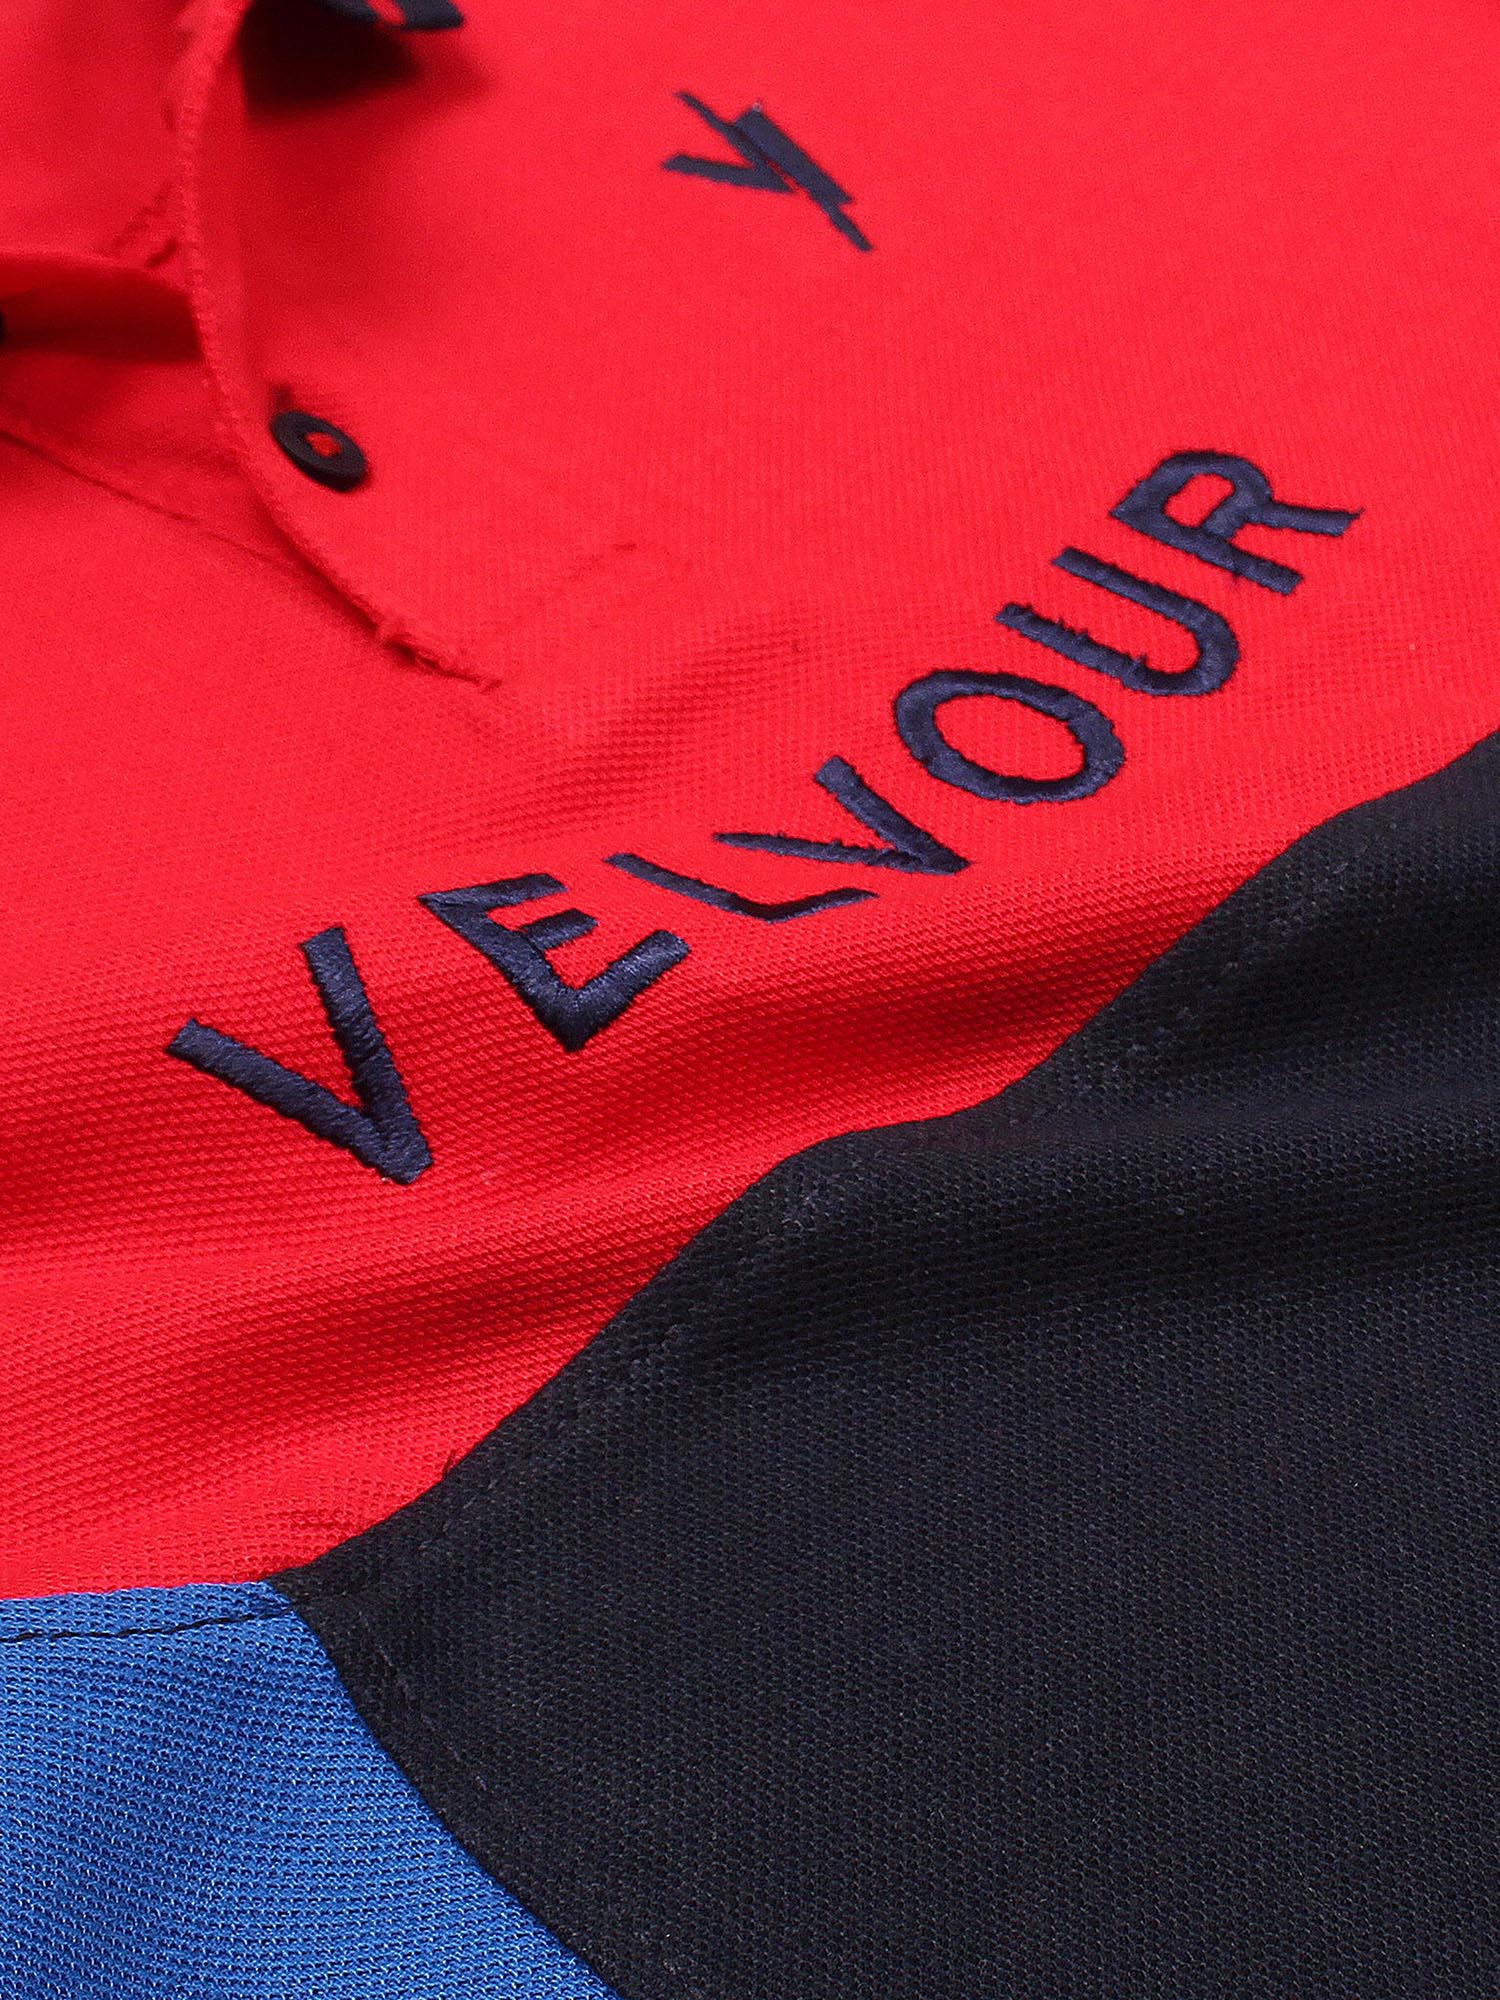 Tipping Collar Boys Polo Shirt Velvour Embroidered  Red And Navy